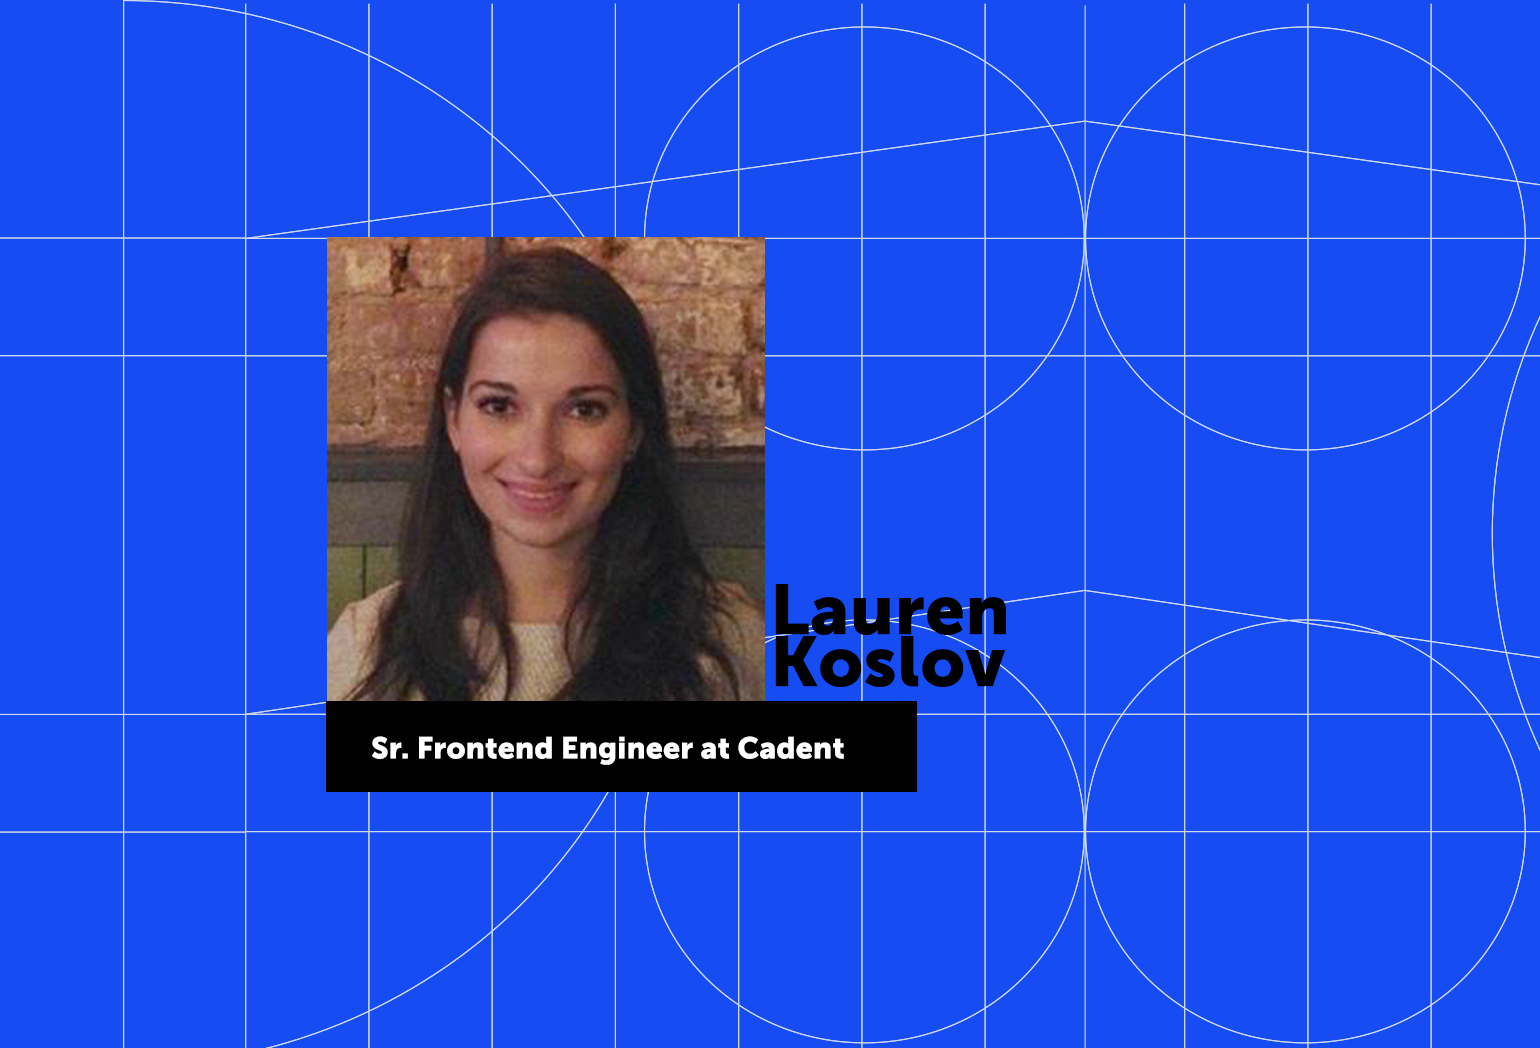 Celebrating International Day of Women and Girls in Science with Lauren Koslov